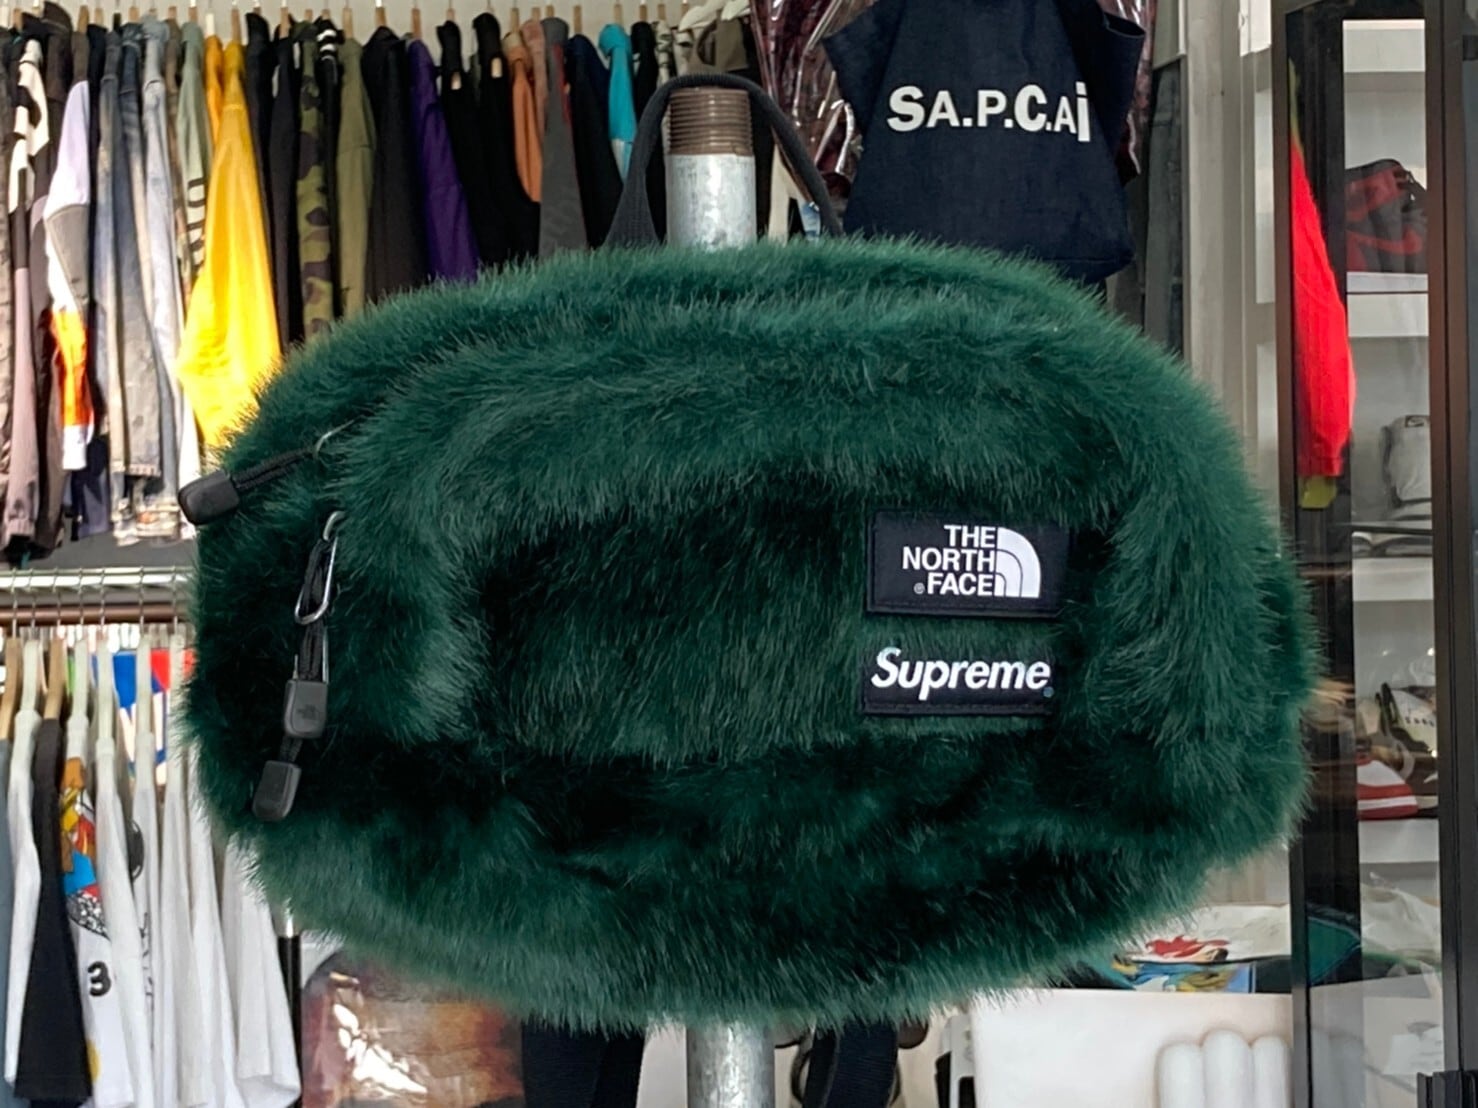 Supreme The North Face Faux Fur WaistBagバック